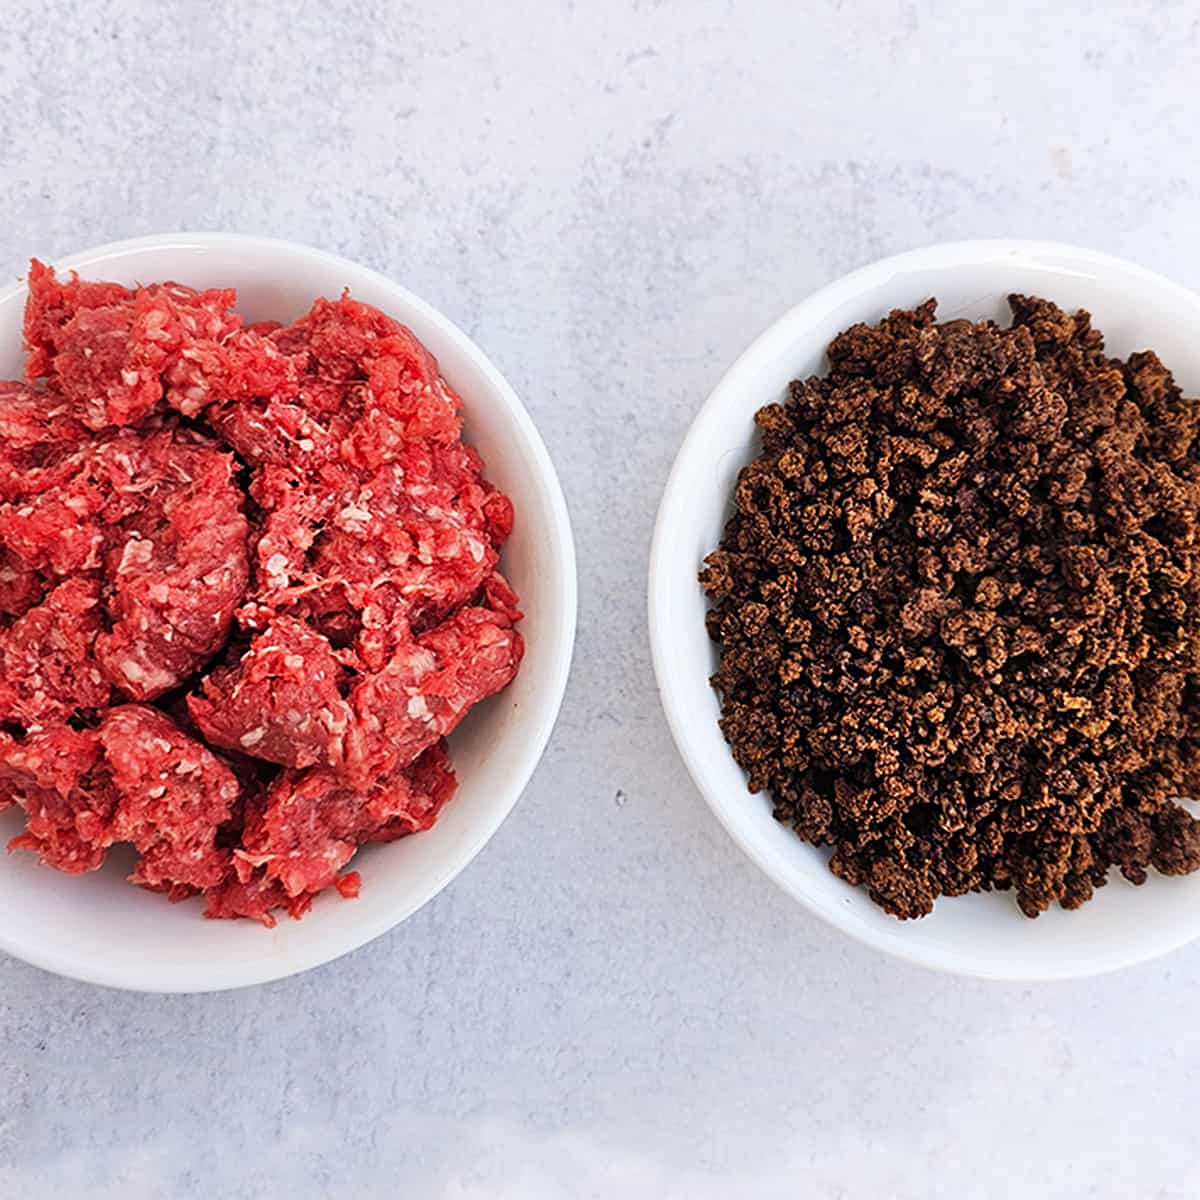 Easy Tips to Dehydrate Ground Beef